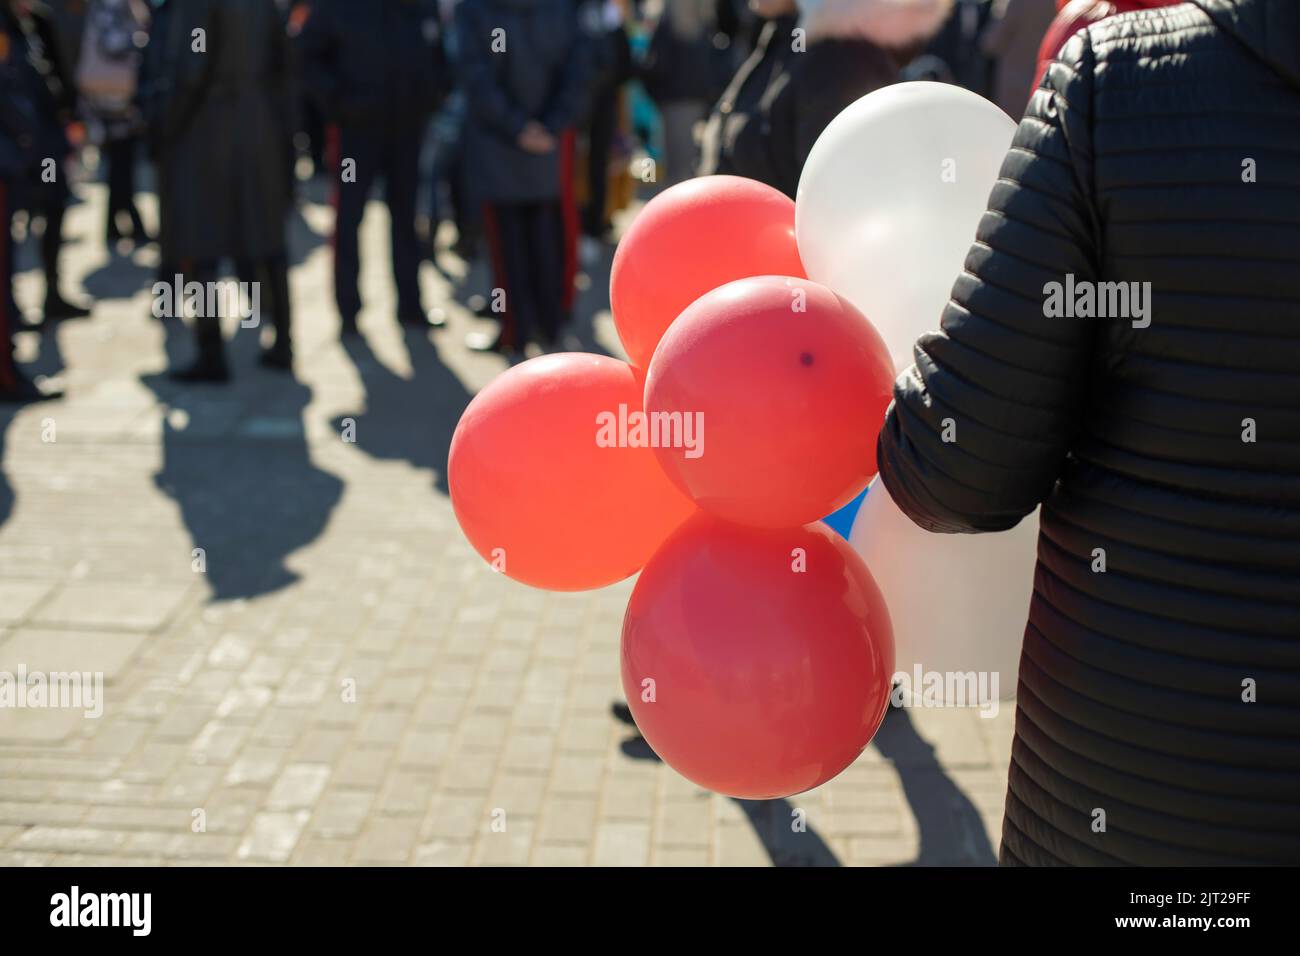 Balloons in hand. Balls at festival. Inflatable balloons in detail. Stock Photo